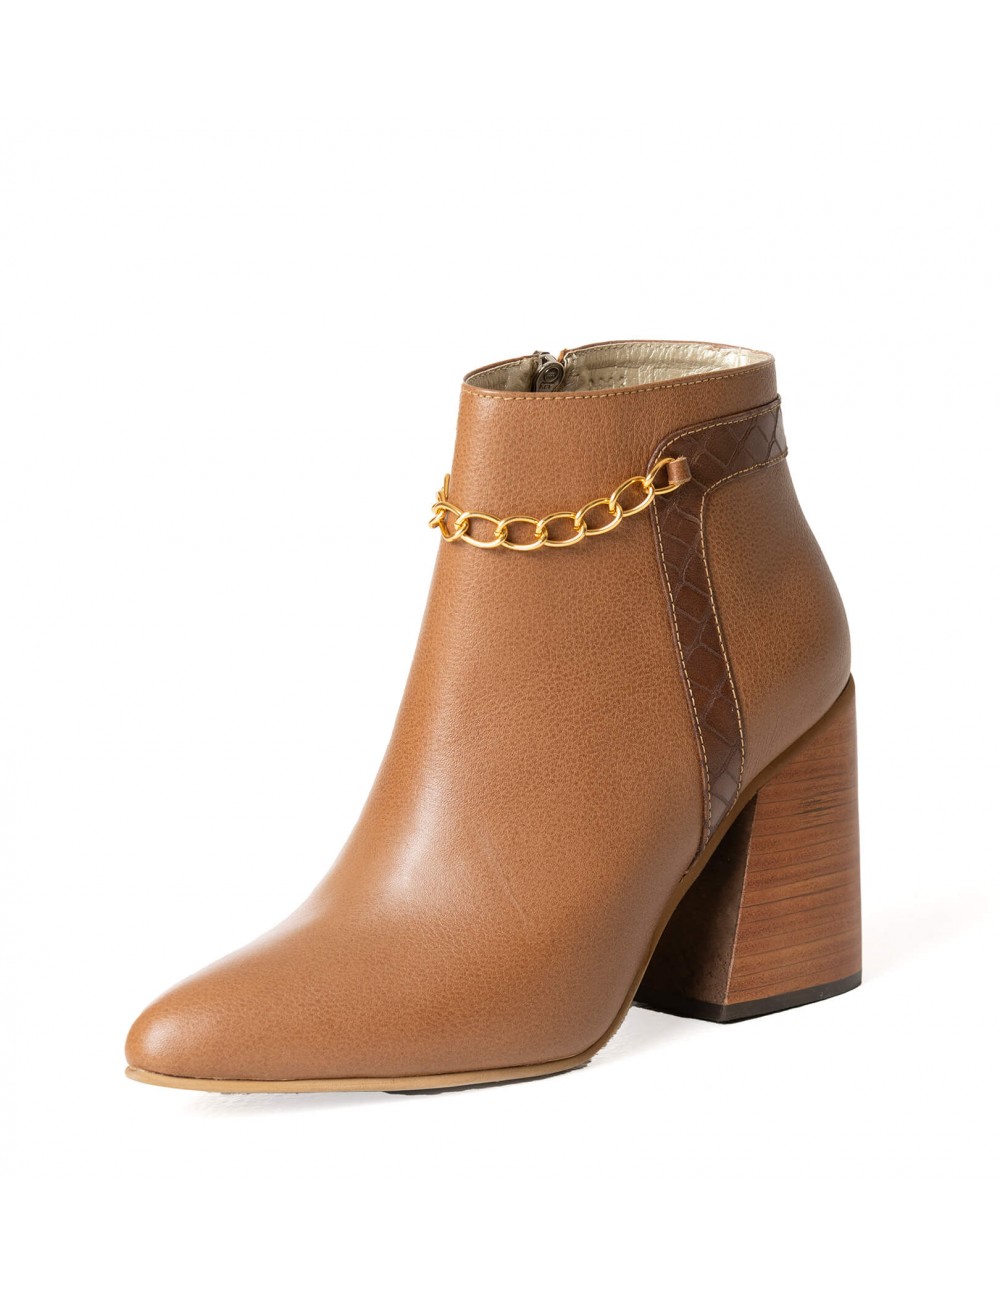 Leather ankle boots with low heel, dark brown, Tamaris | La Redoute